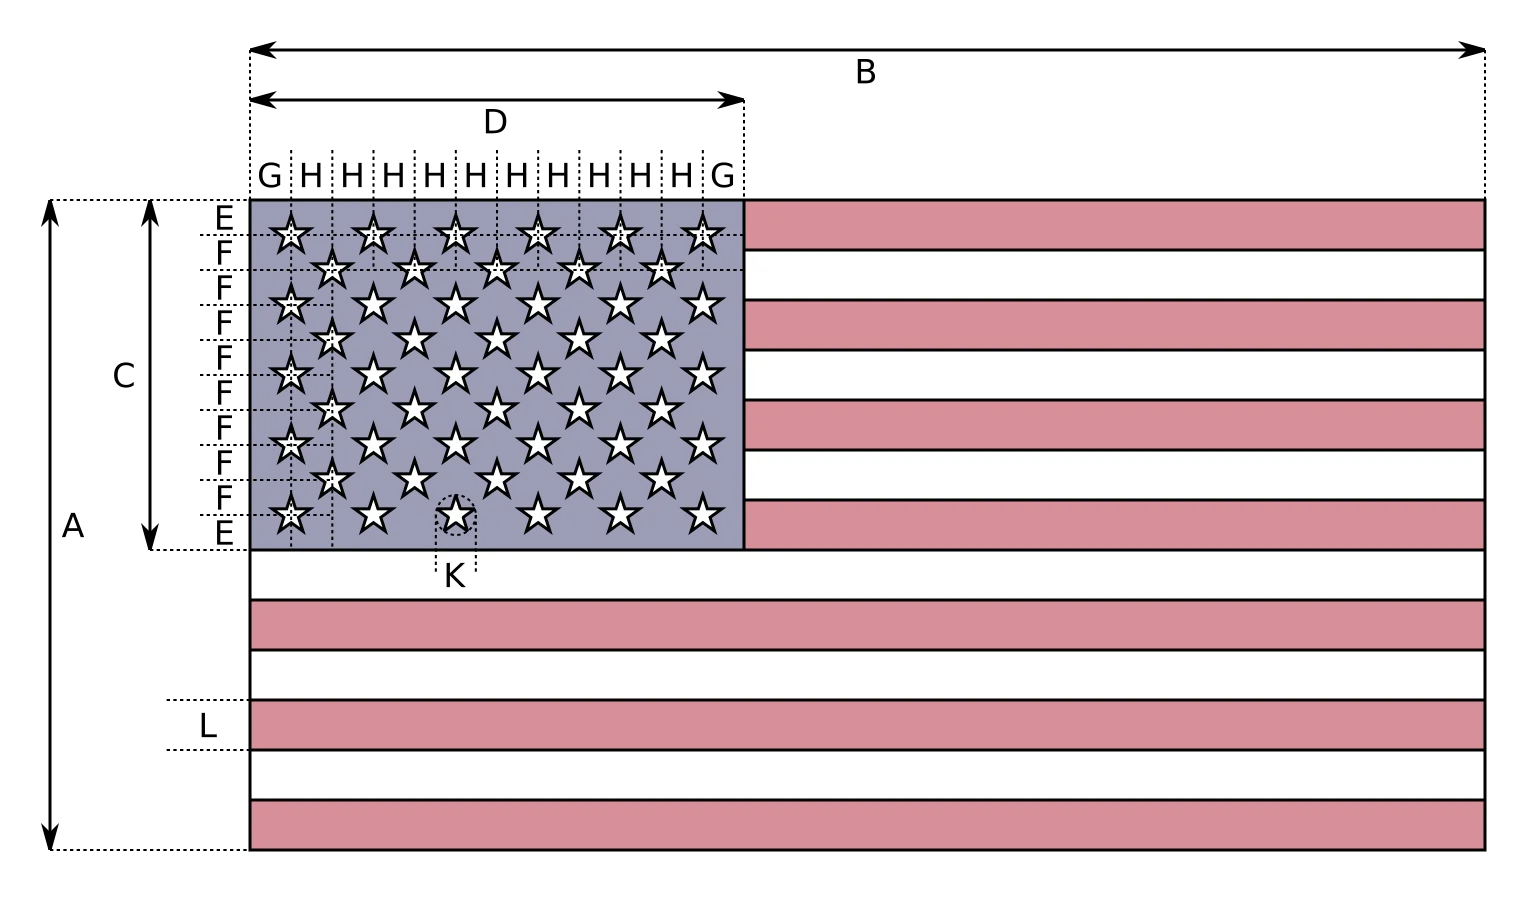 A similar diagram of the flag of the United States was given in Executive Order 10834, by Dwight D. Eisenhower, on August 21, 1959 - Design